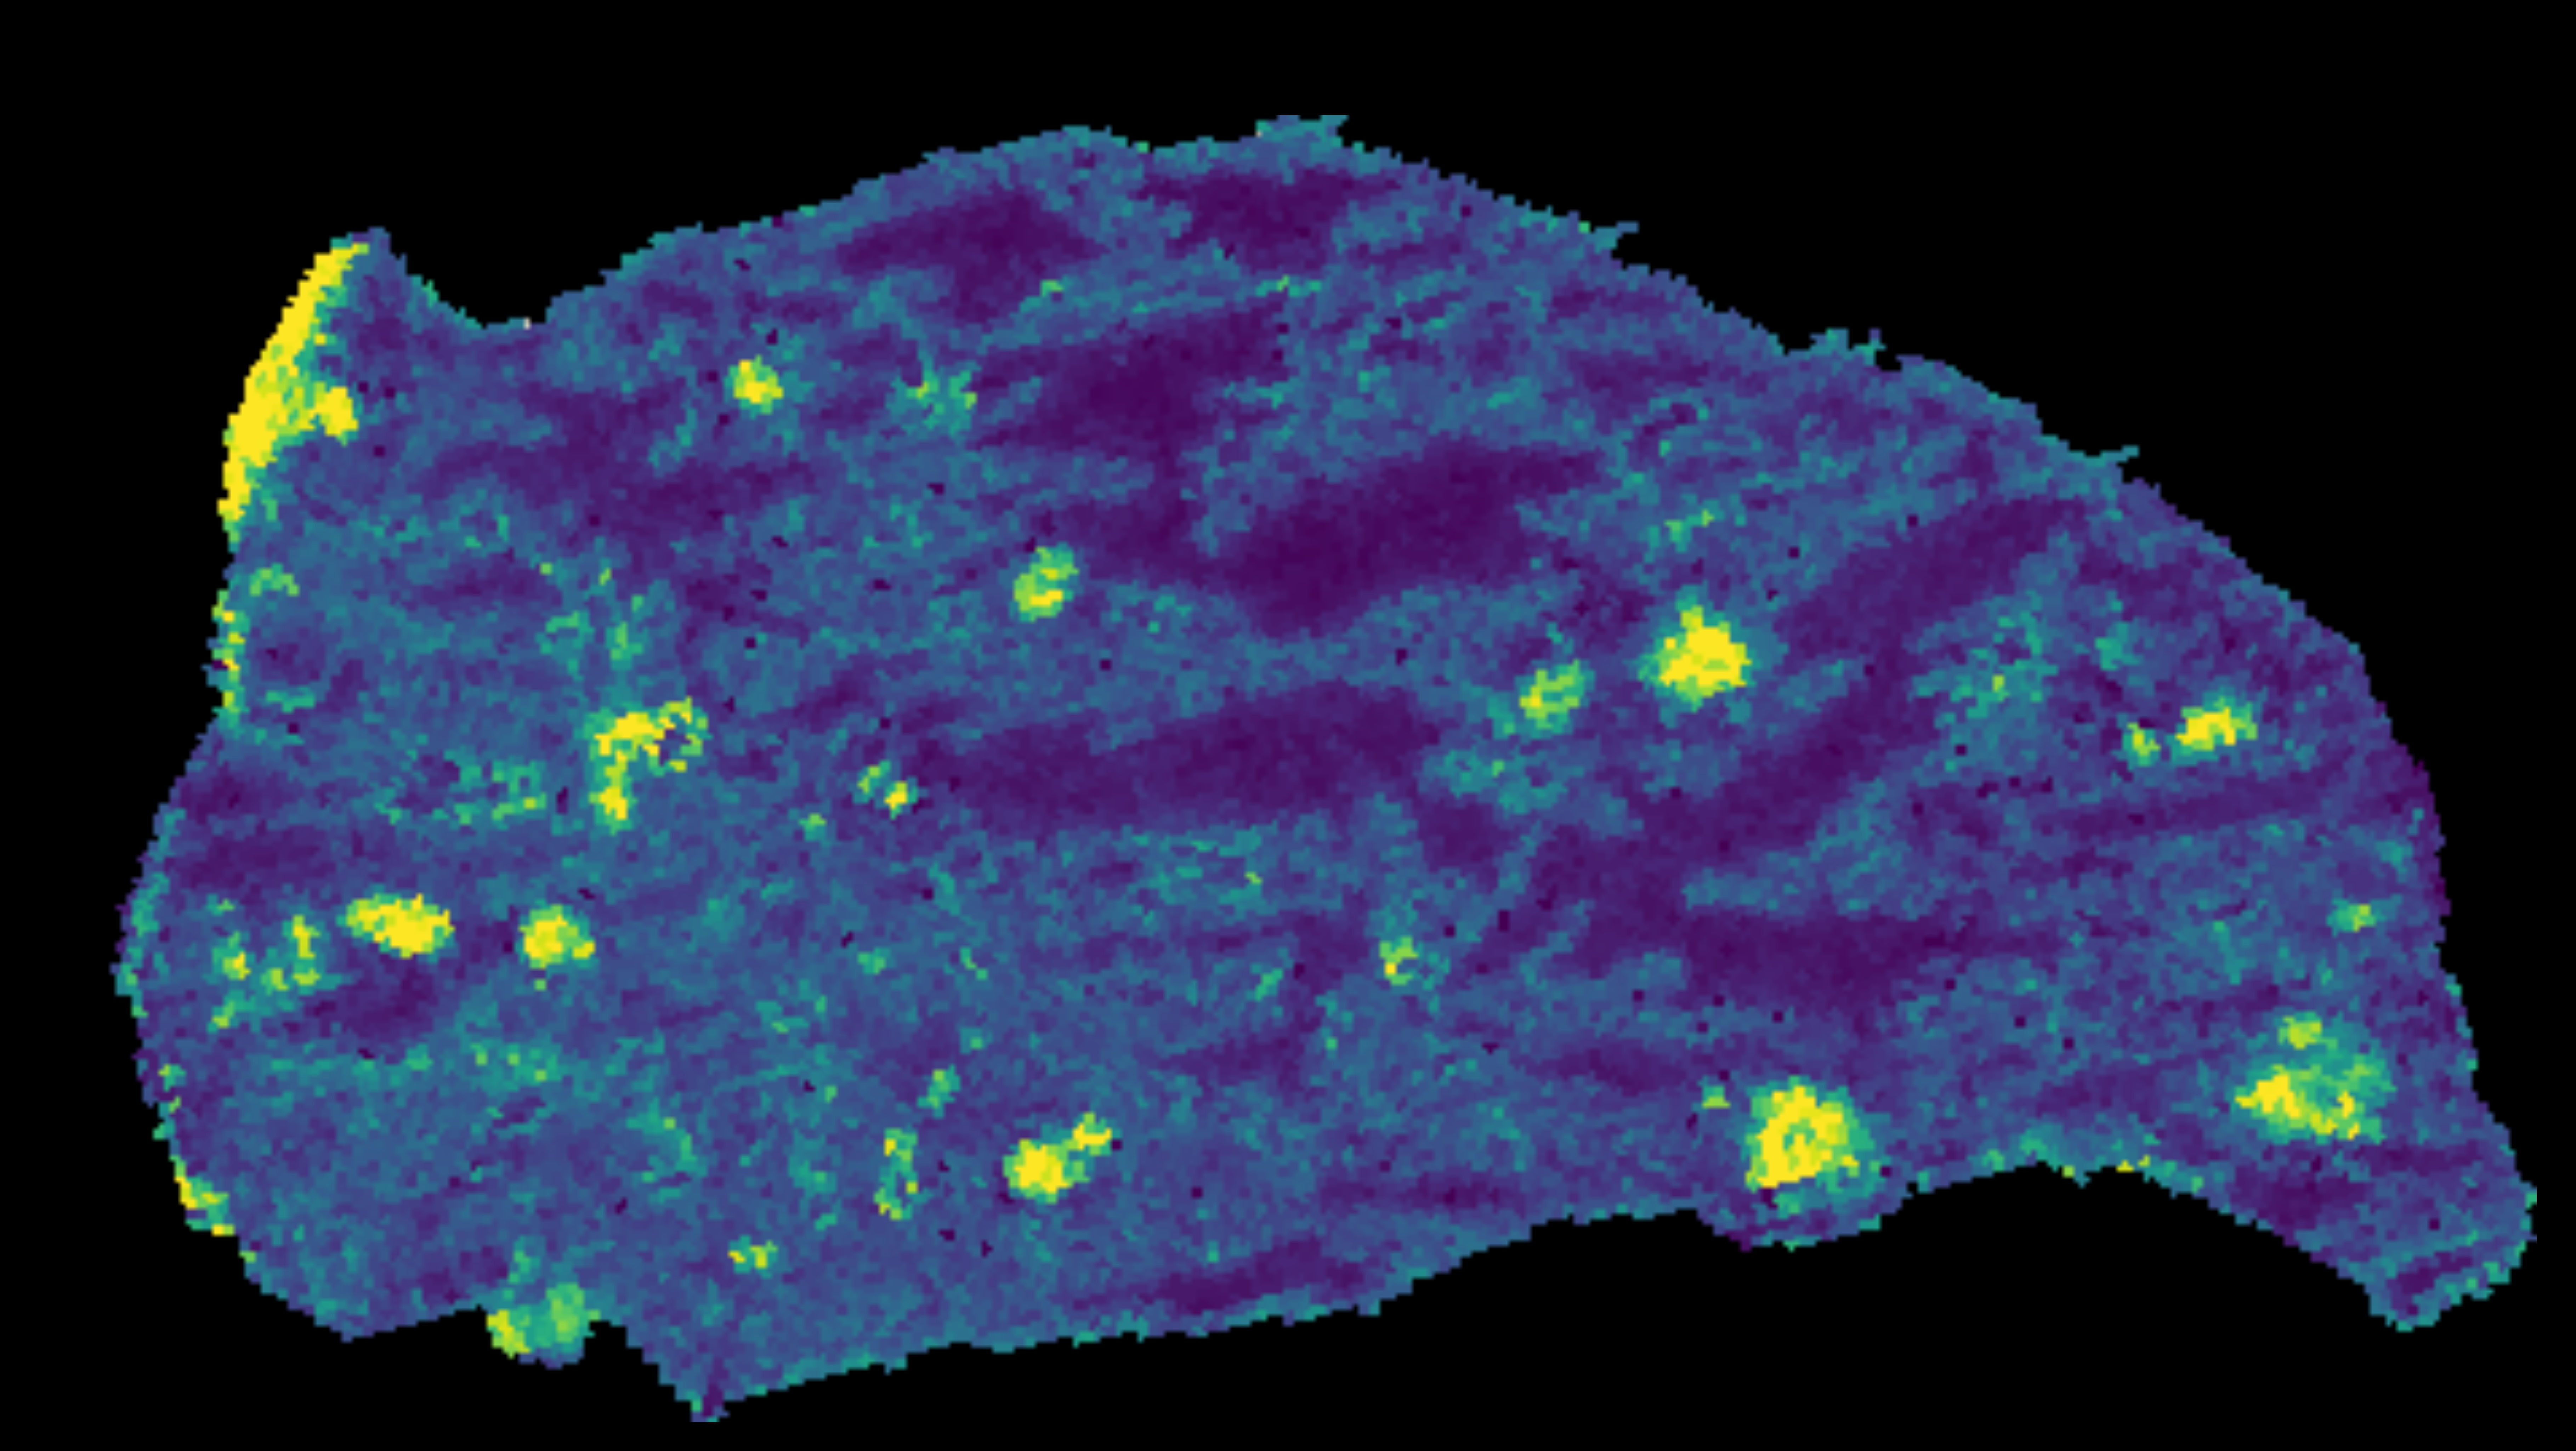 Lung tissue showing palmitate concentrations (yellow) where metastatic tumors are located.